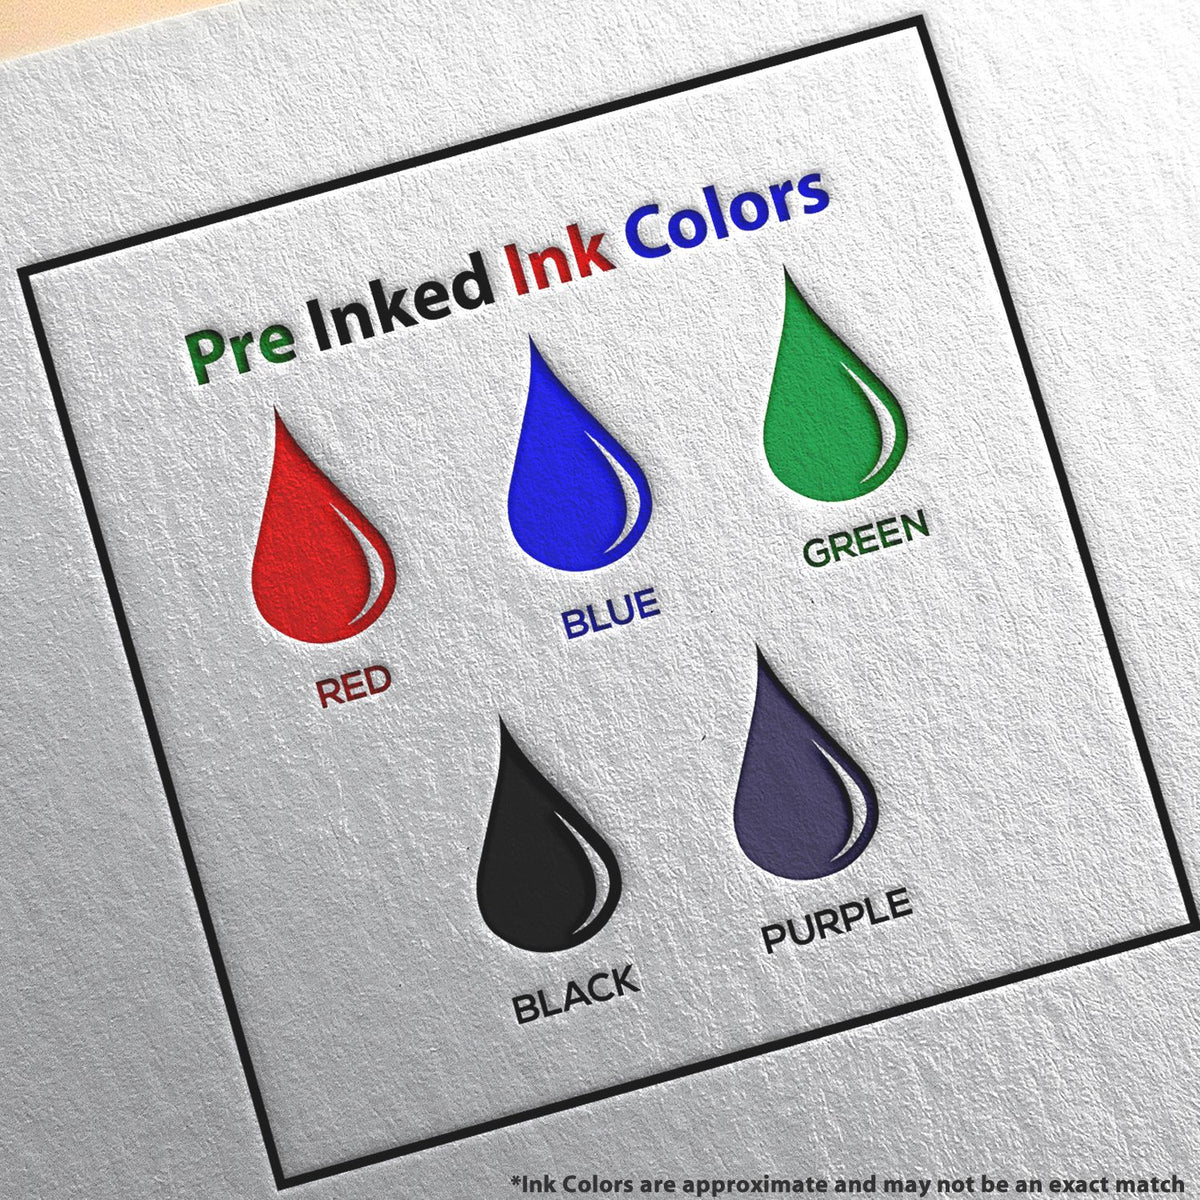 A picture showing the different ink colors or hues available for the Slim Pre-Inked West Virginia Landscape Architect Seal Stamp product.